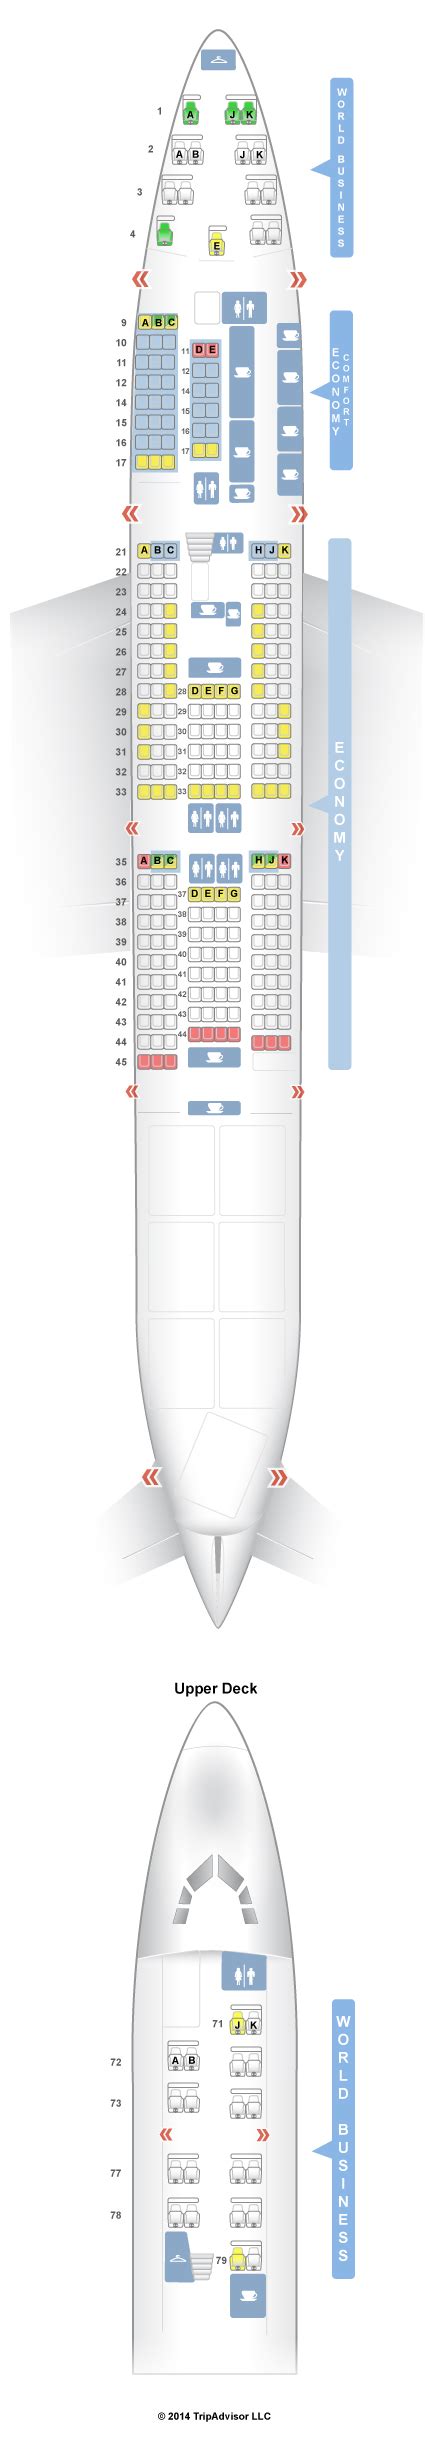 Klm Boeing Seating Chart Hot Sex Picture